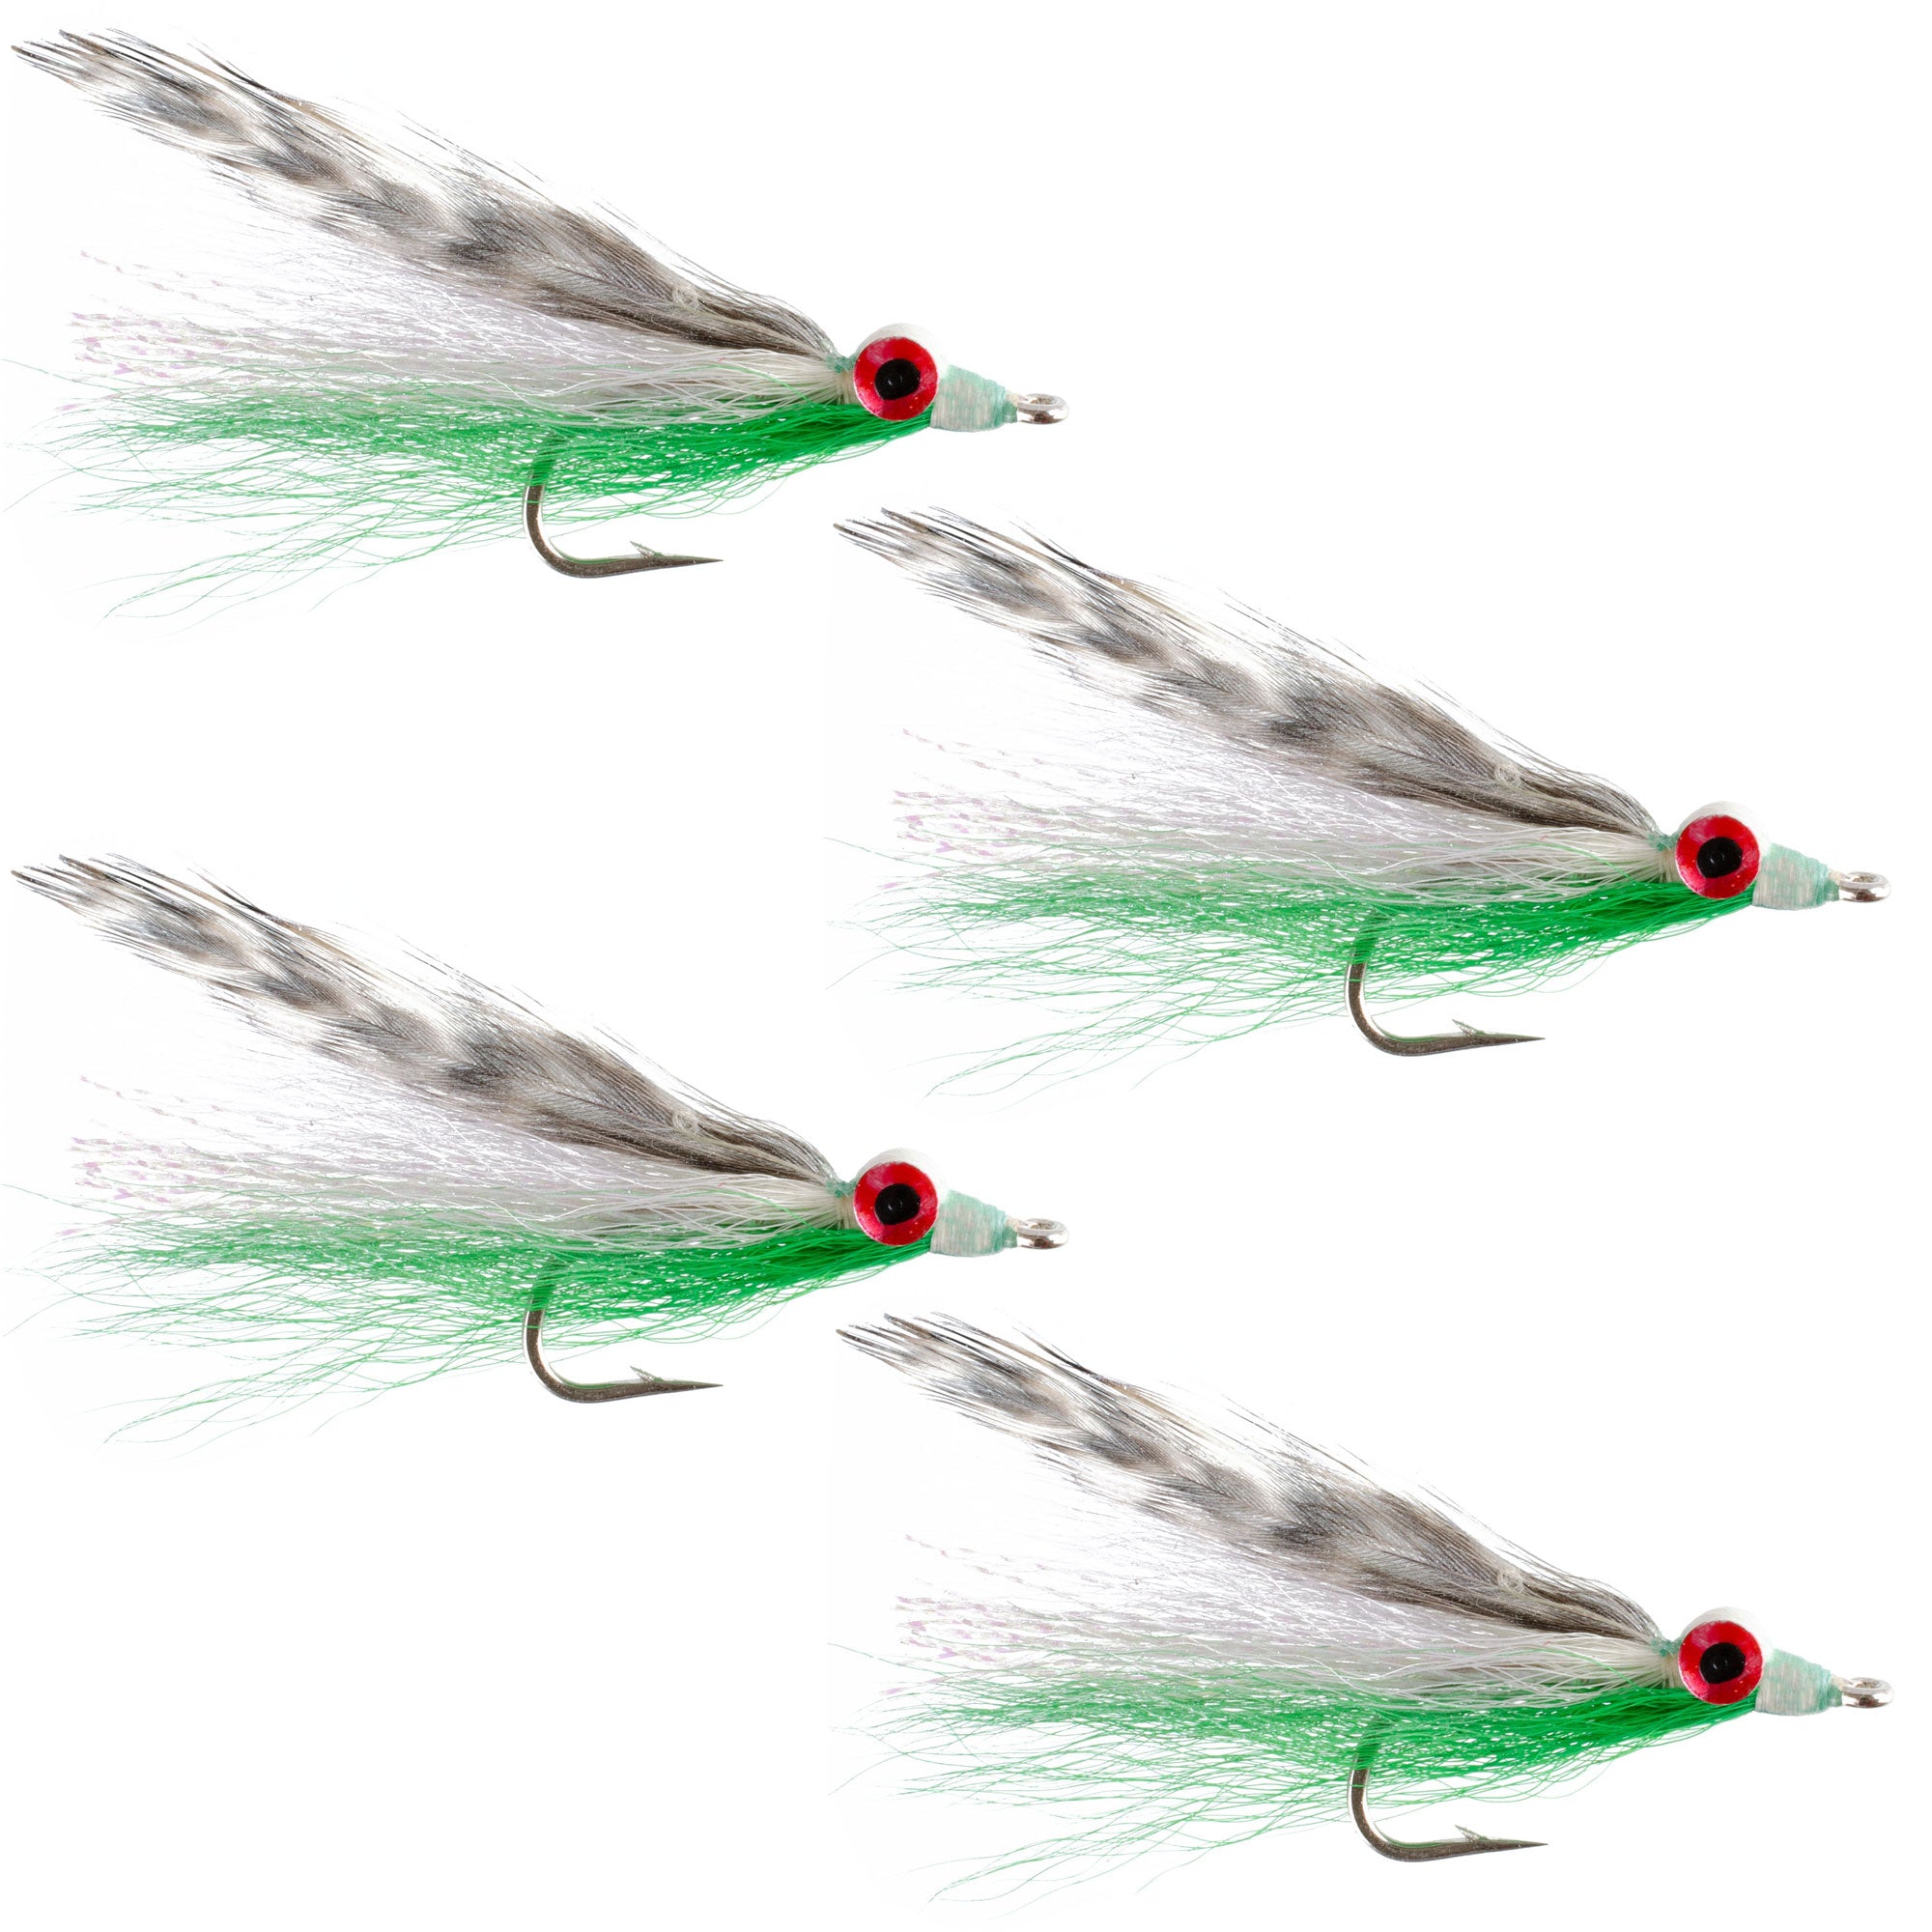 Clousers Clouceiver Deep Minnow Grizzly Green - Streamer Fly Fishing Flies - 4 Saltwater and Bass Flies - Hook Size 1/0